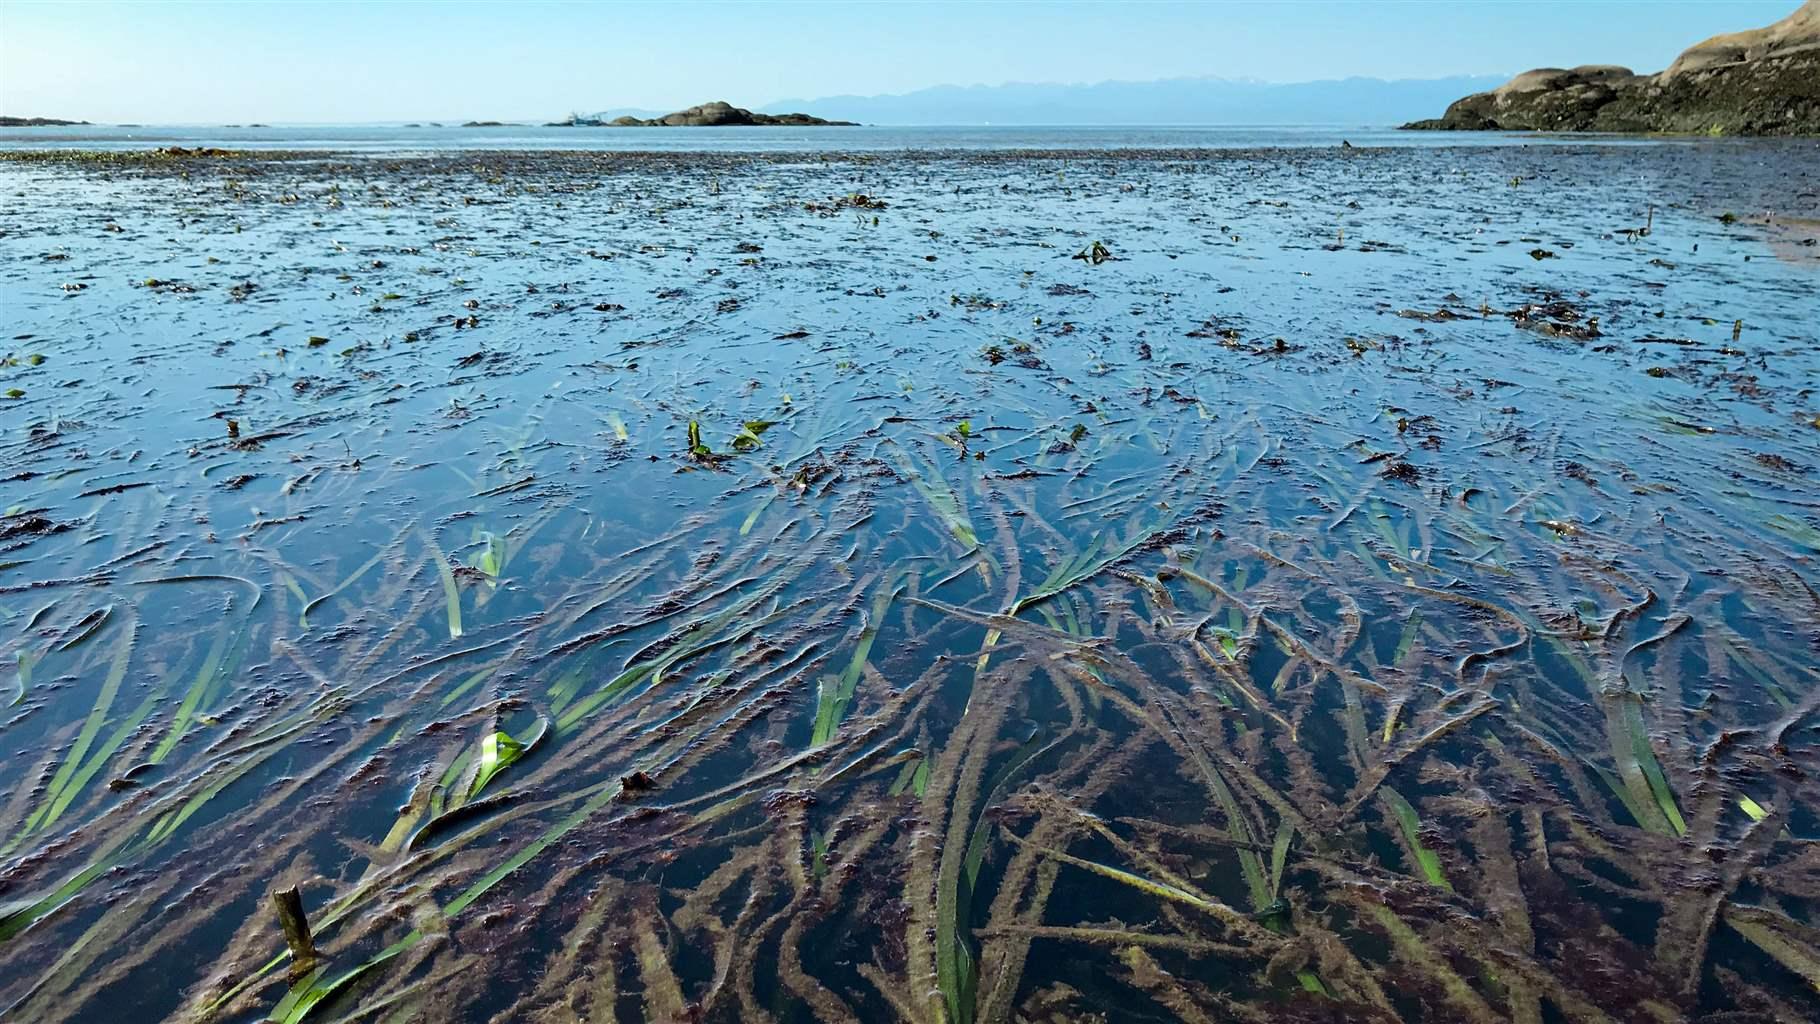 A closeup of underwater vegetation, bordered by a rocky coastline, with mountains and a blue sky in the background.